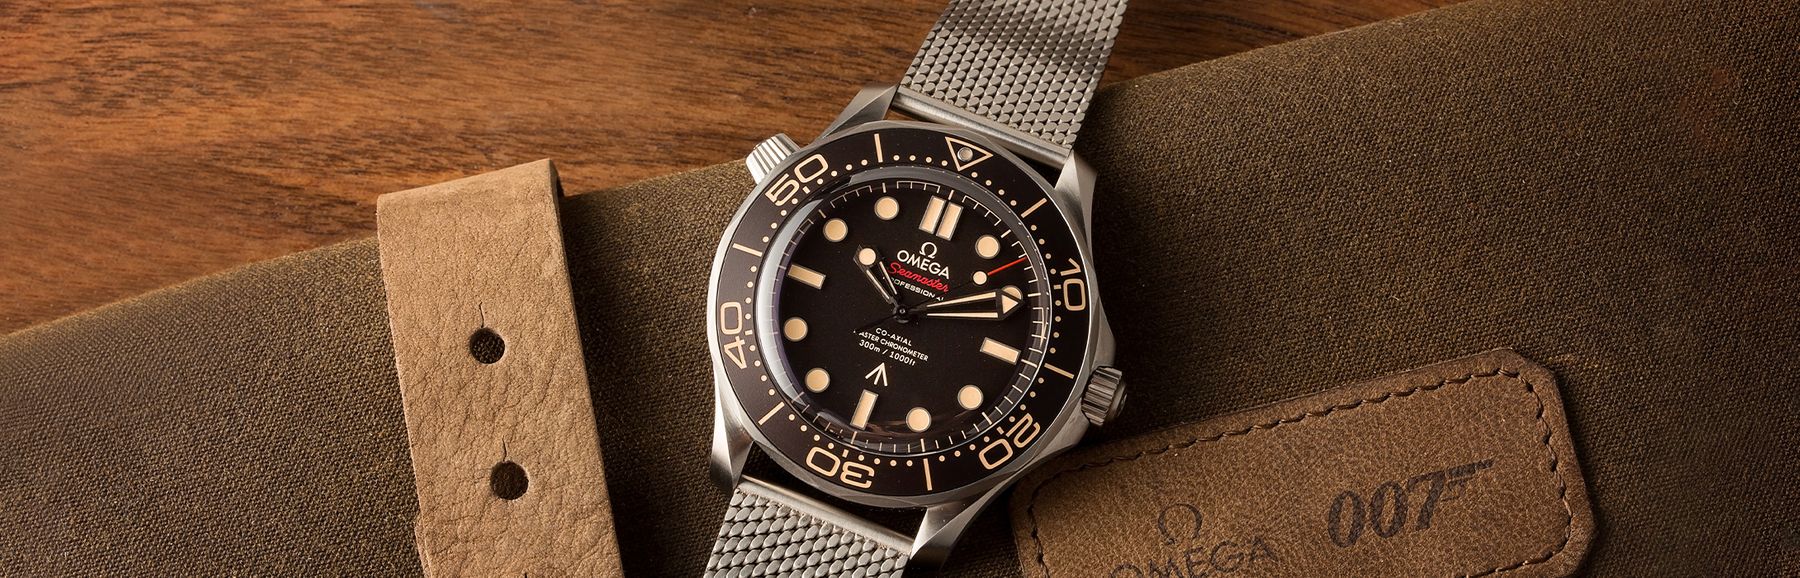 James Bond Omega Seamaster Watches – Every Model Worn By Agent 007